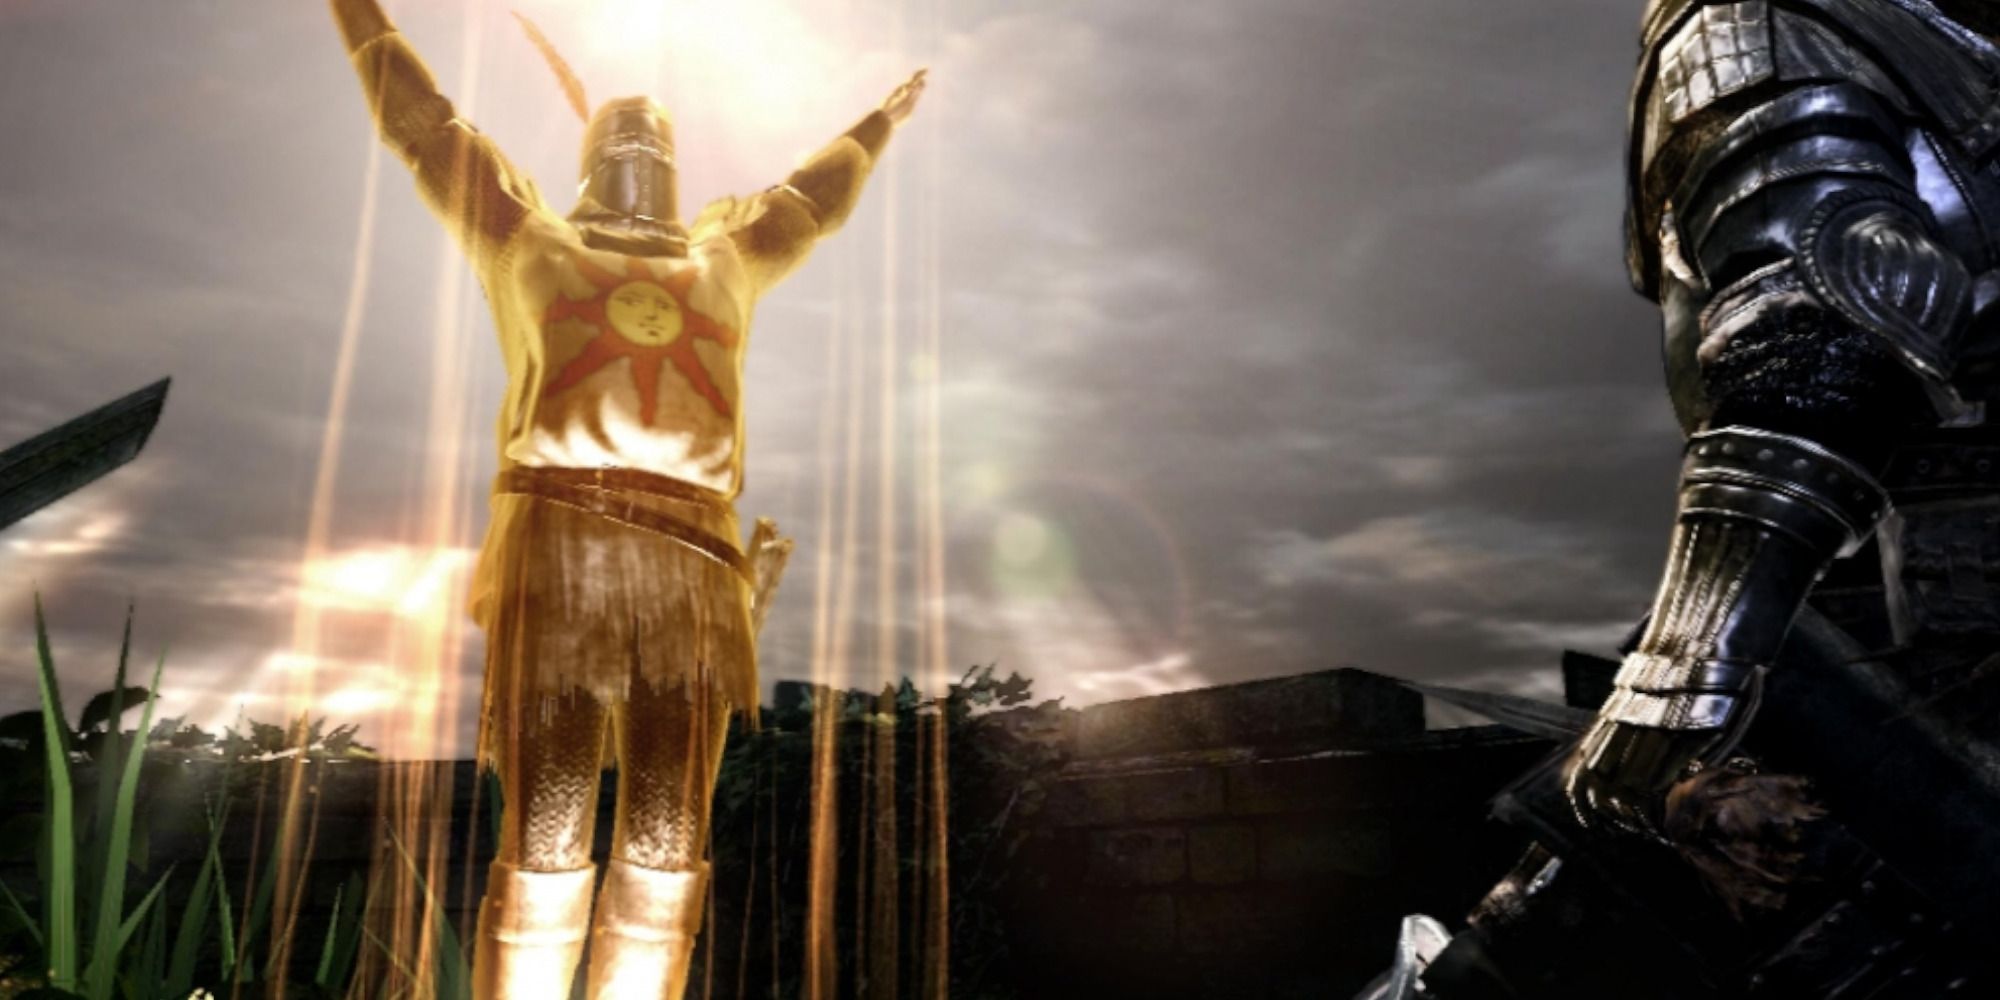 Praise the sun gesture being performed by Solaire from Dark Souls